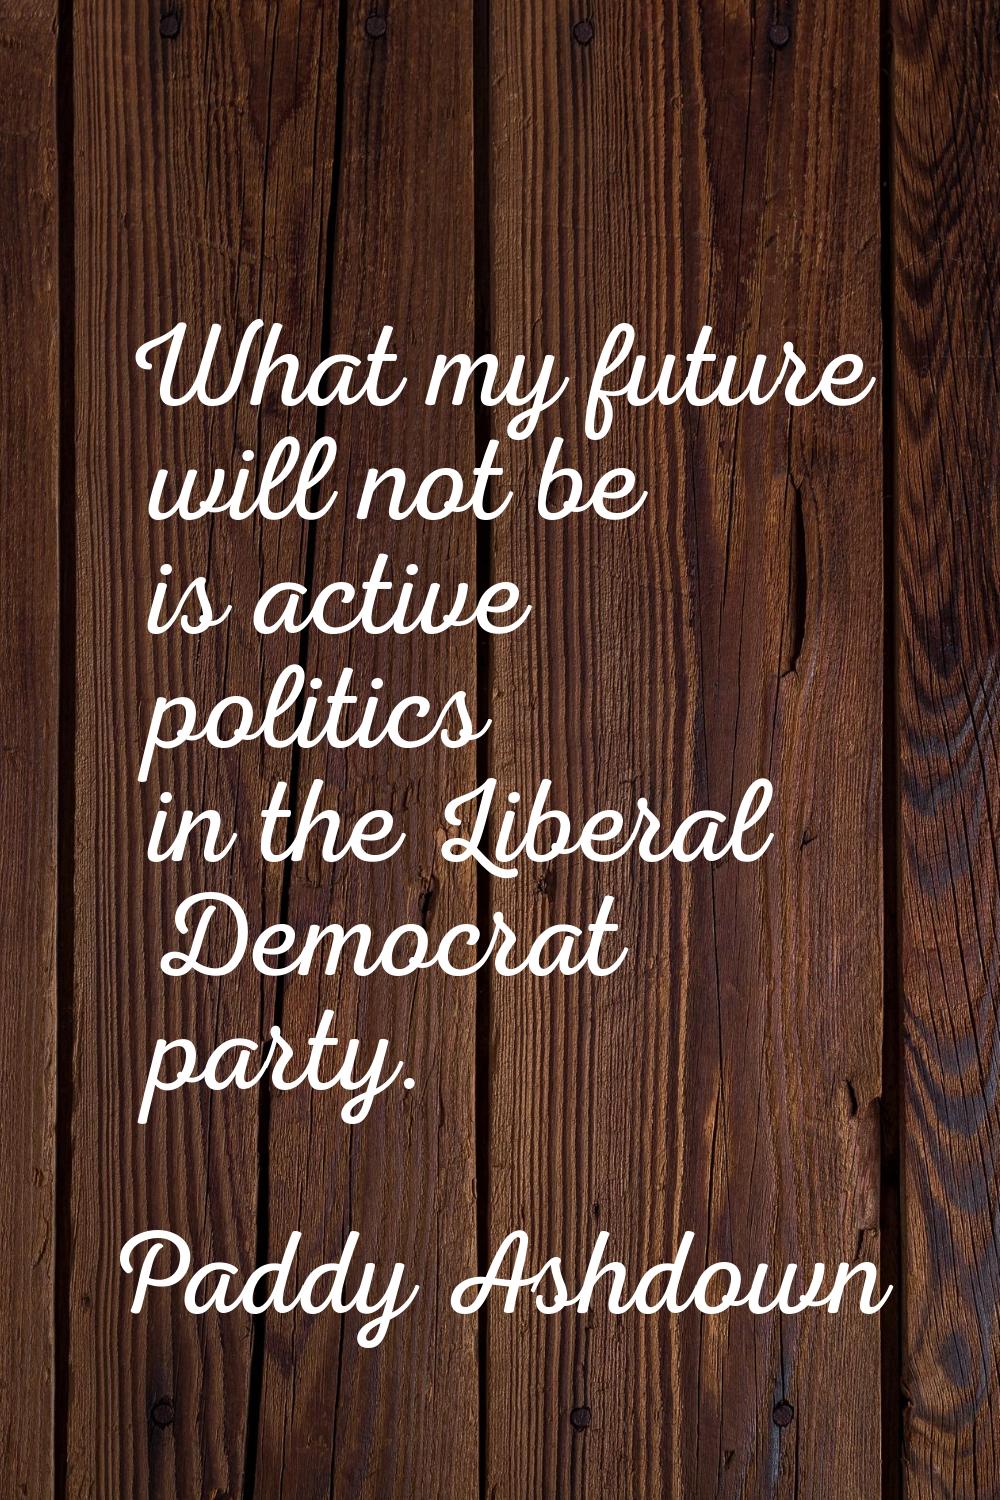 What my future will not be is active politics in the Liberal Democrat party.